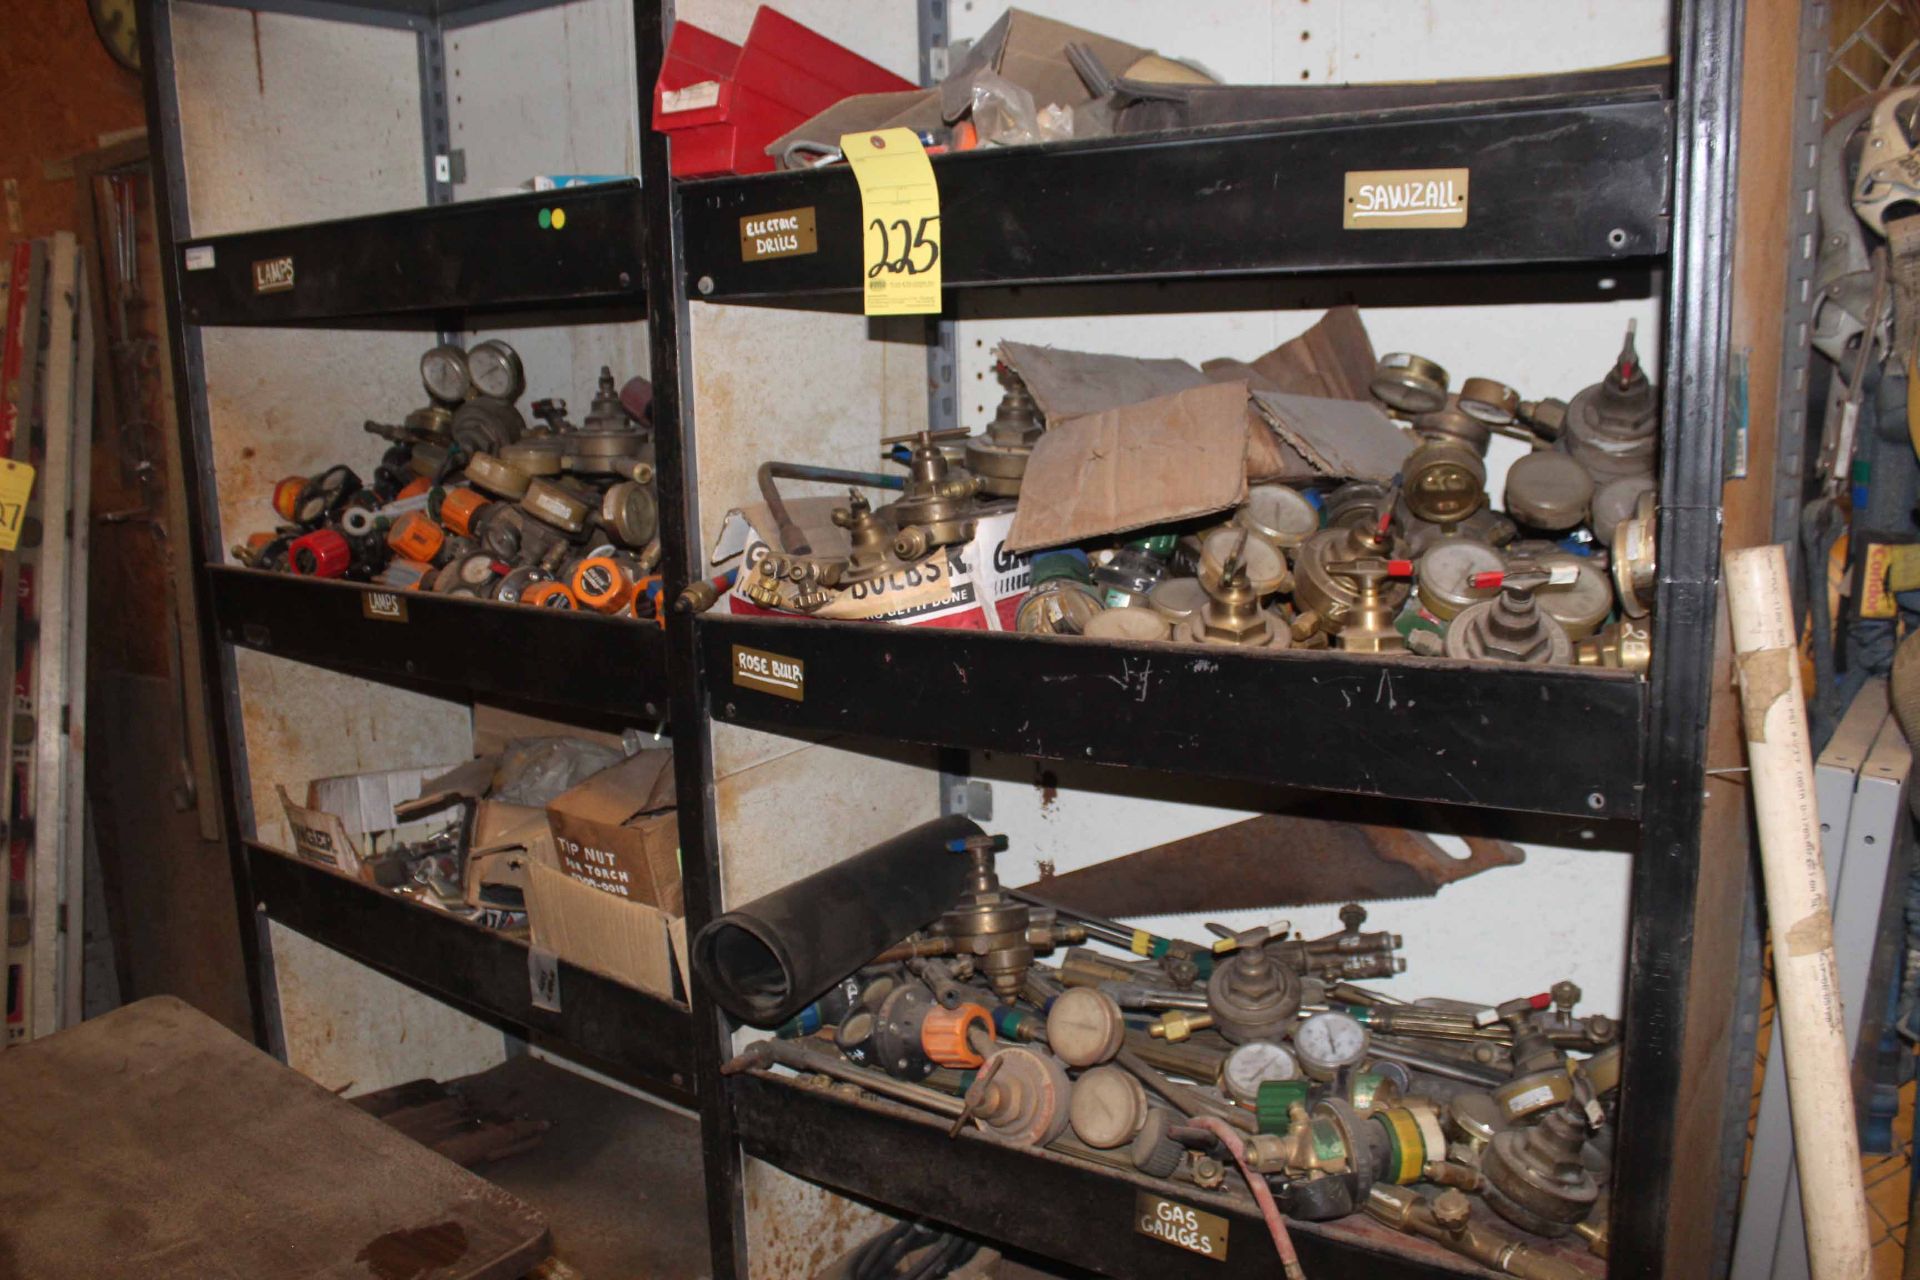 LOT CONSISTING OF: gauge, tips, torches, etc. (in two pigeon hole cabinets)